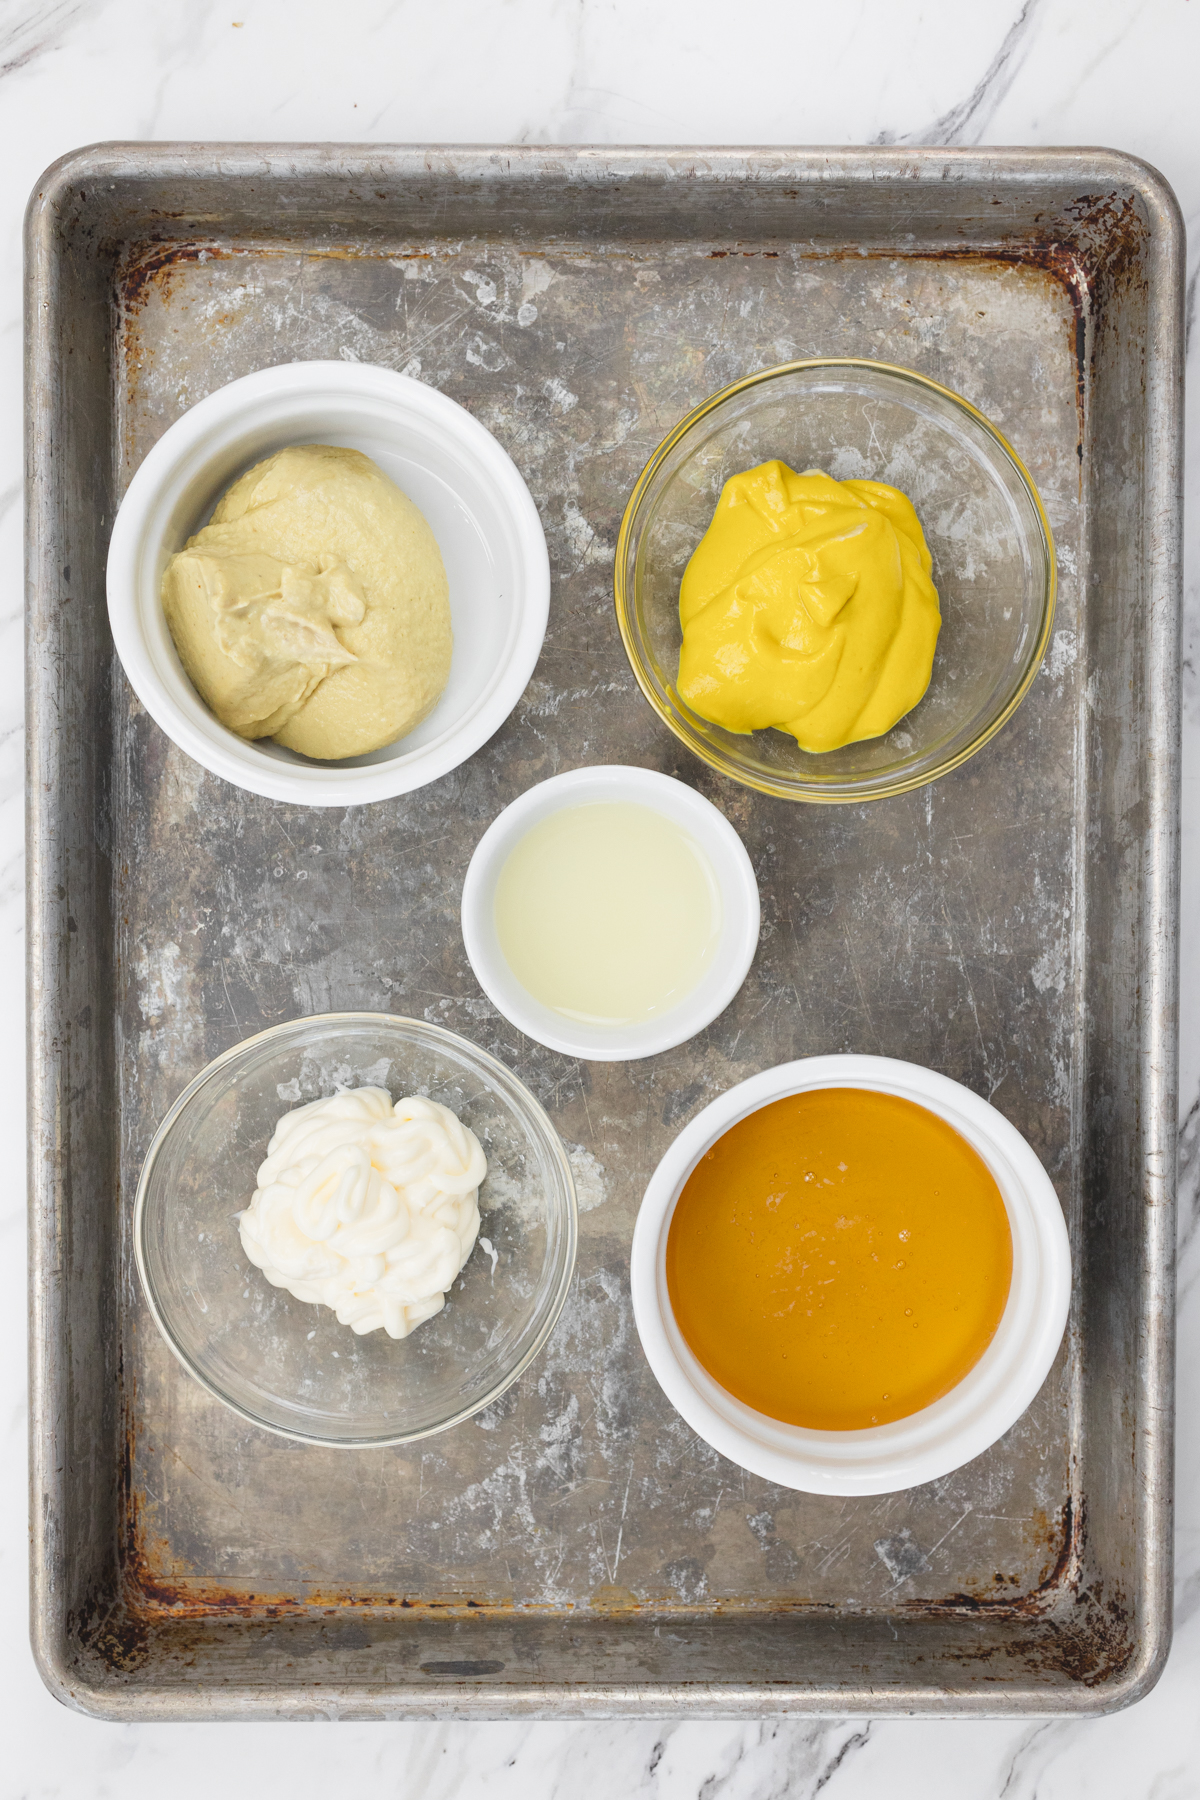 Top view of ingredients needed to make honey mustard dipping sauce in small bowls on a baking tray.